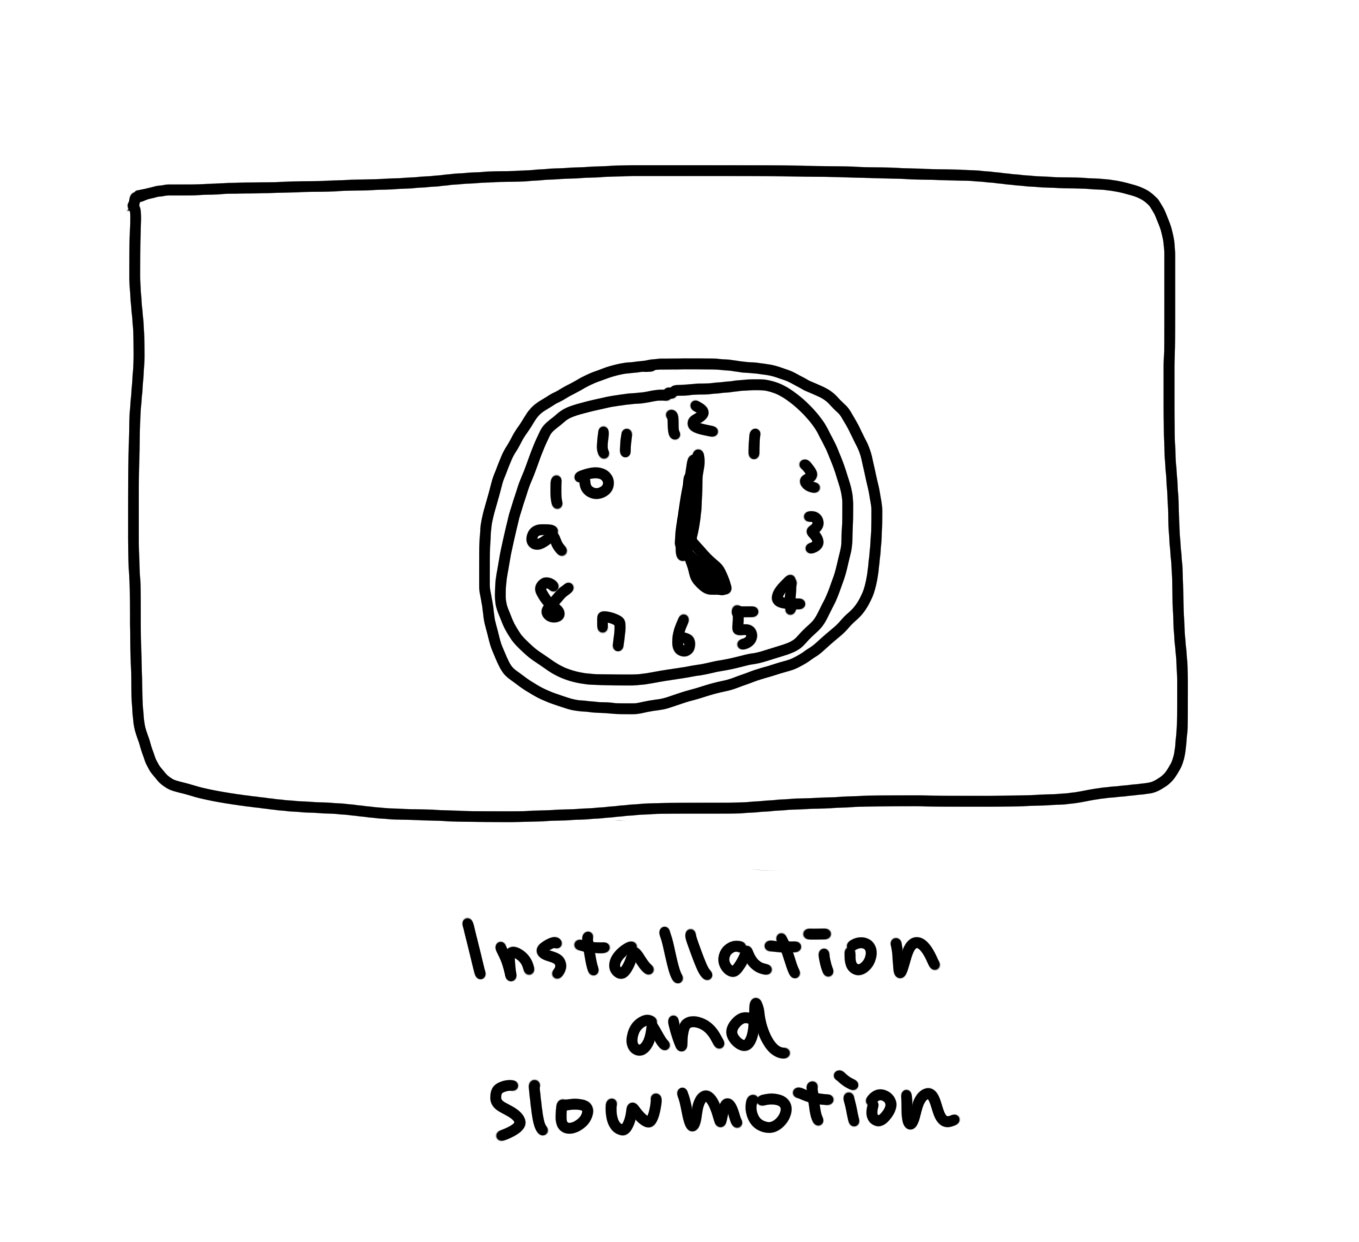 Installation and SlowMotion